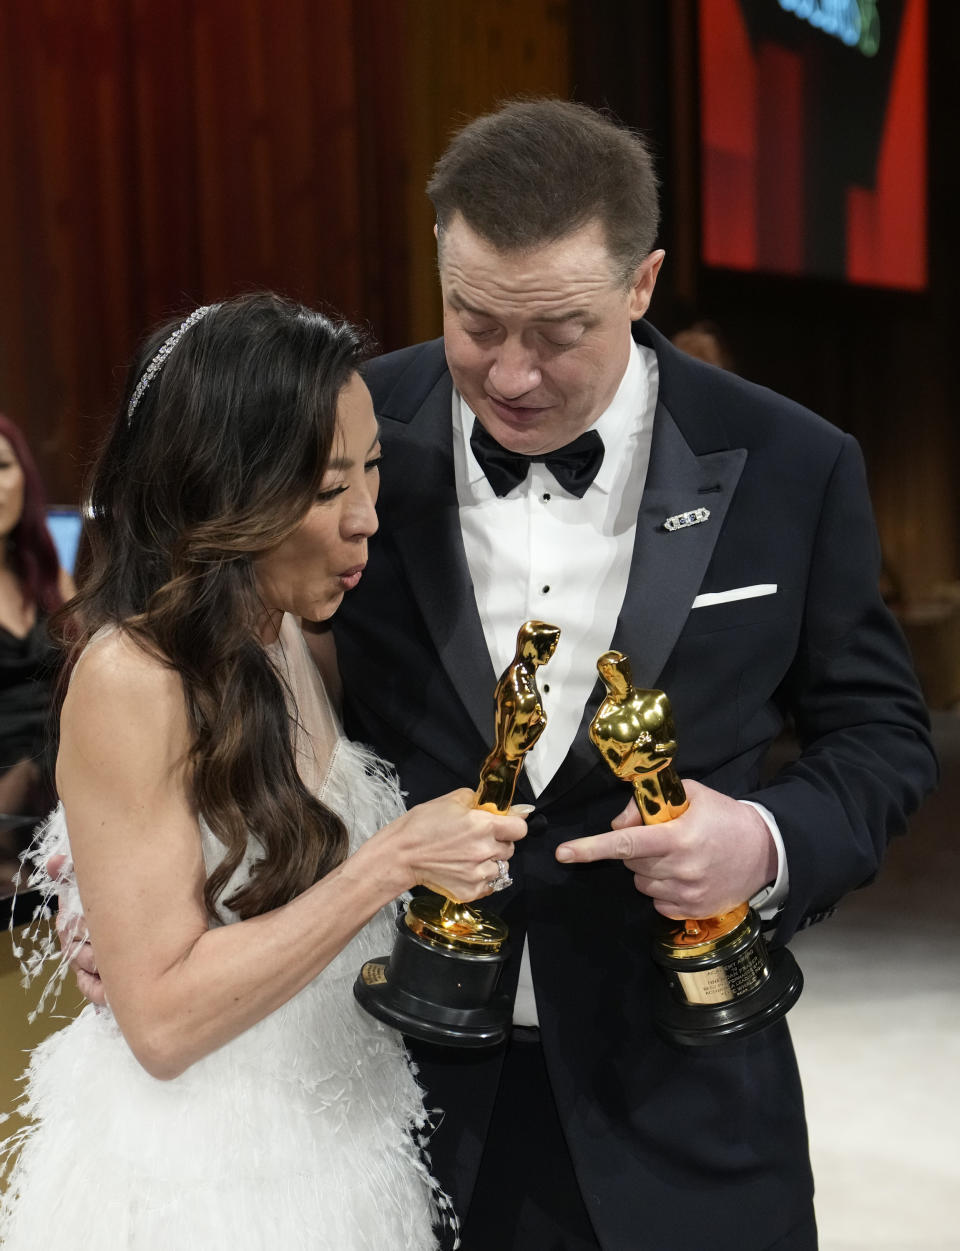 Michelle Yeoh, left, and Brendan Fraser pose with their awards at the Governors Ball after the Oscars on Sunday, March 12, 2023, at the Dolby Theatre in Los Angeles. Michelle Yeoh won the award for best performance by an actress in a leading role for "Everything Everywhere All at Once," and Brendan Fraser won the award for best performance by an actor in a leading role for "The Whale." (AP Photo/John Locher)